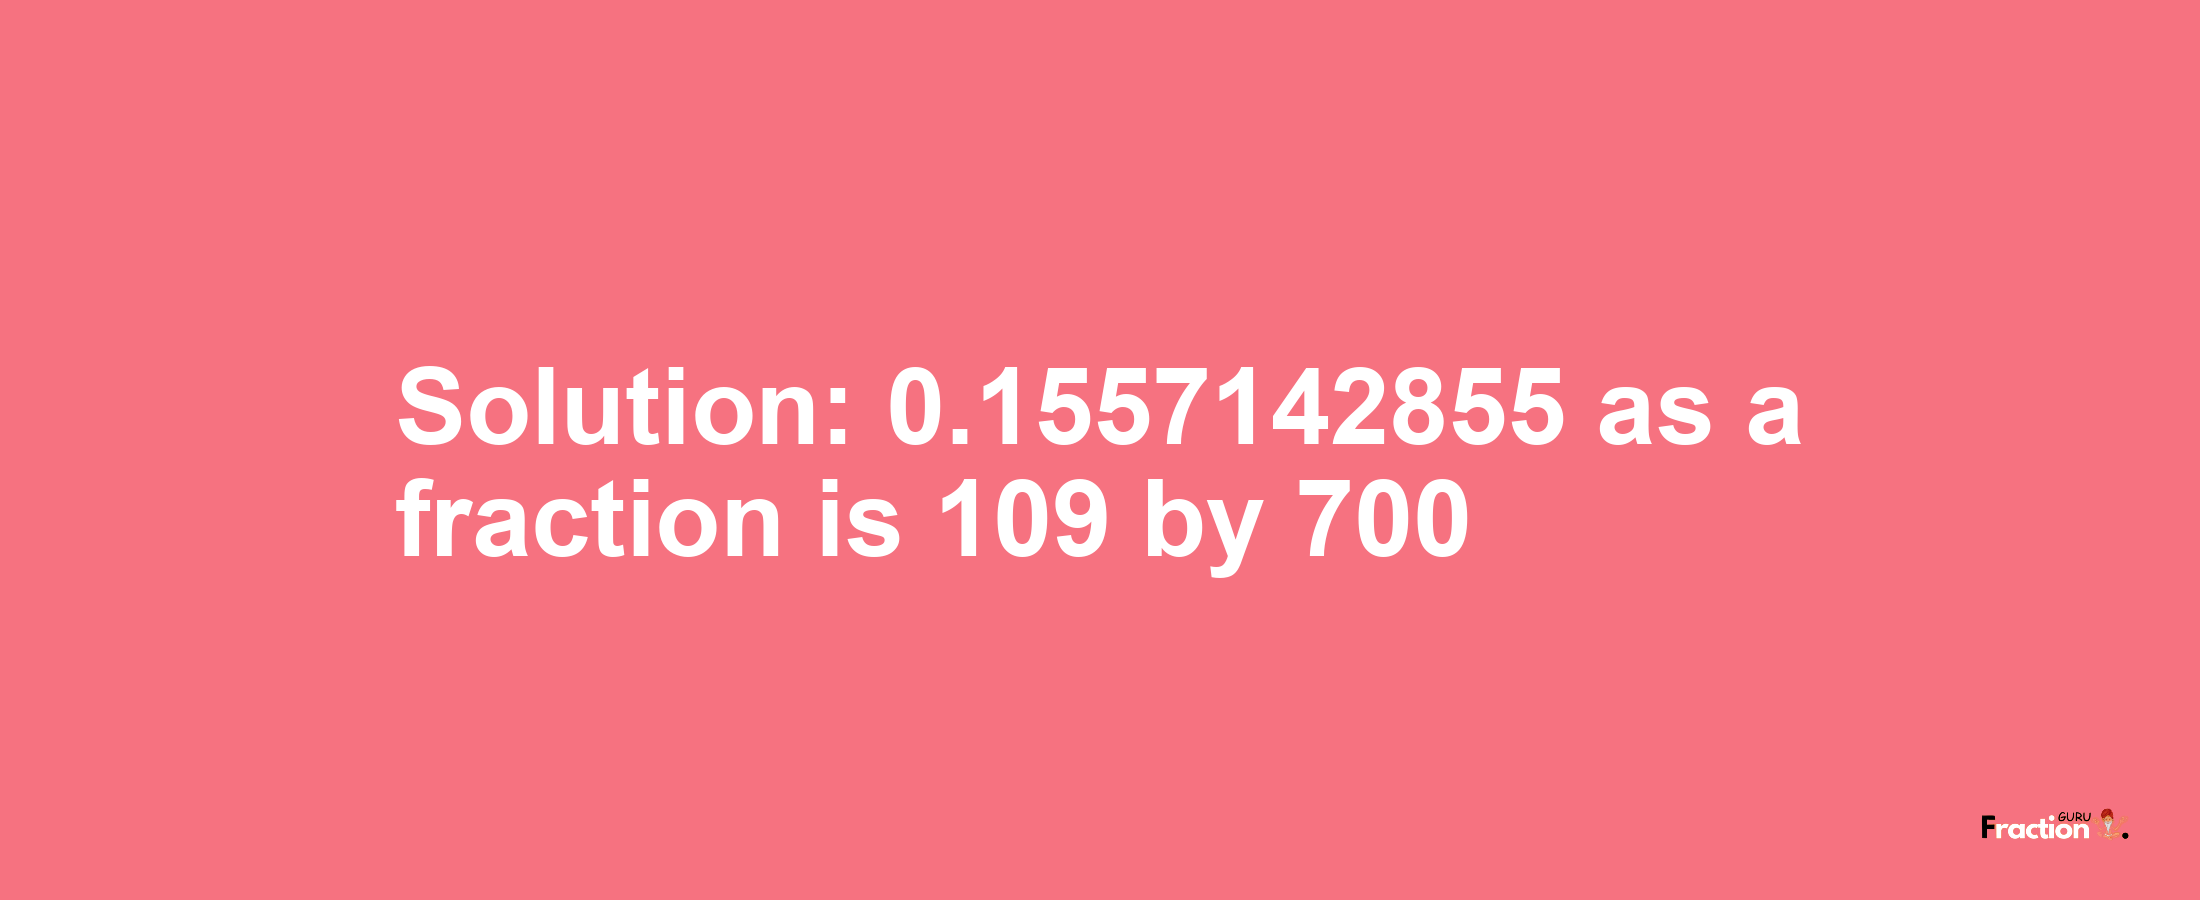 Solution:0.1557142855 as a fraction is 109/700